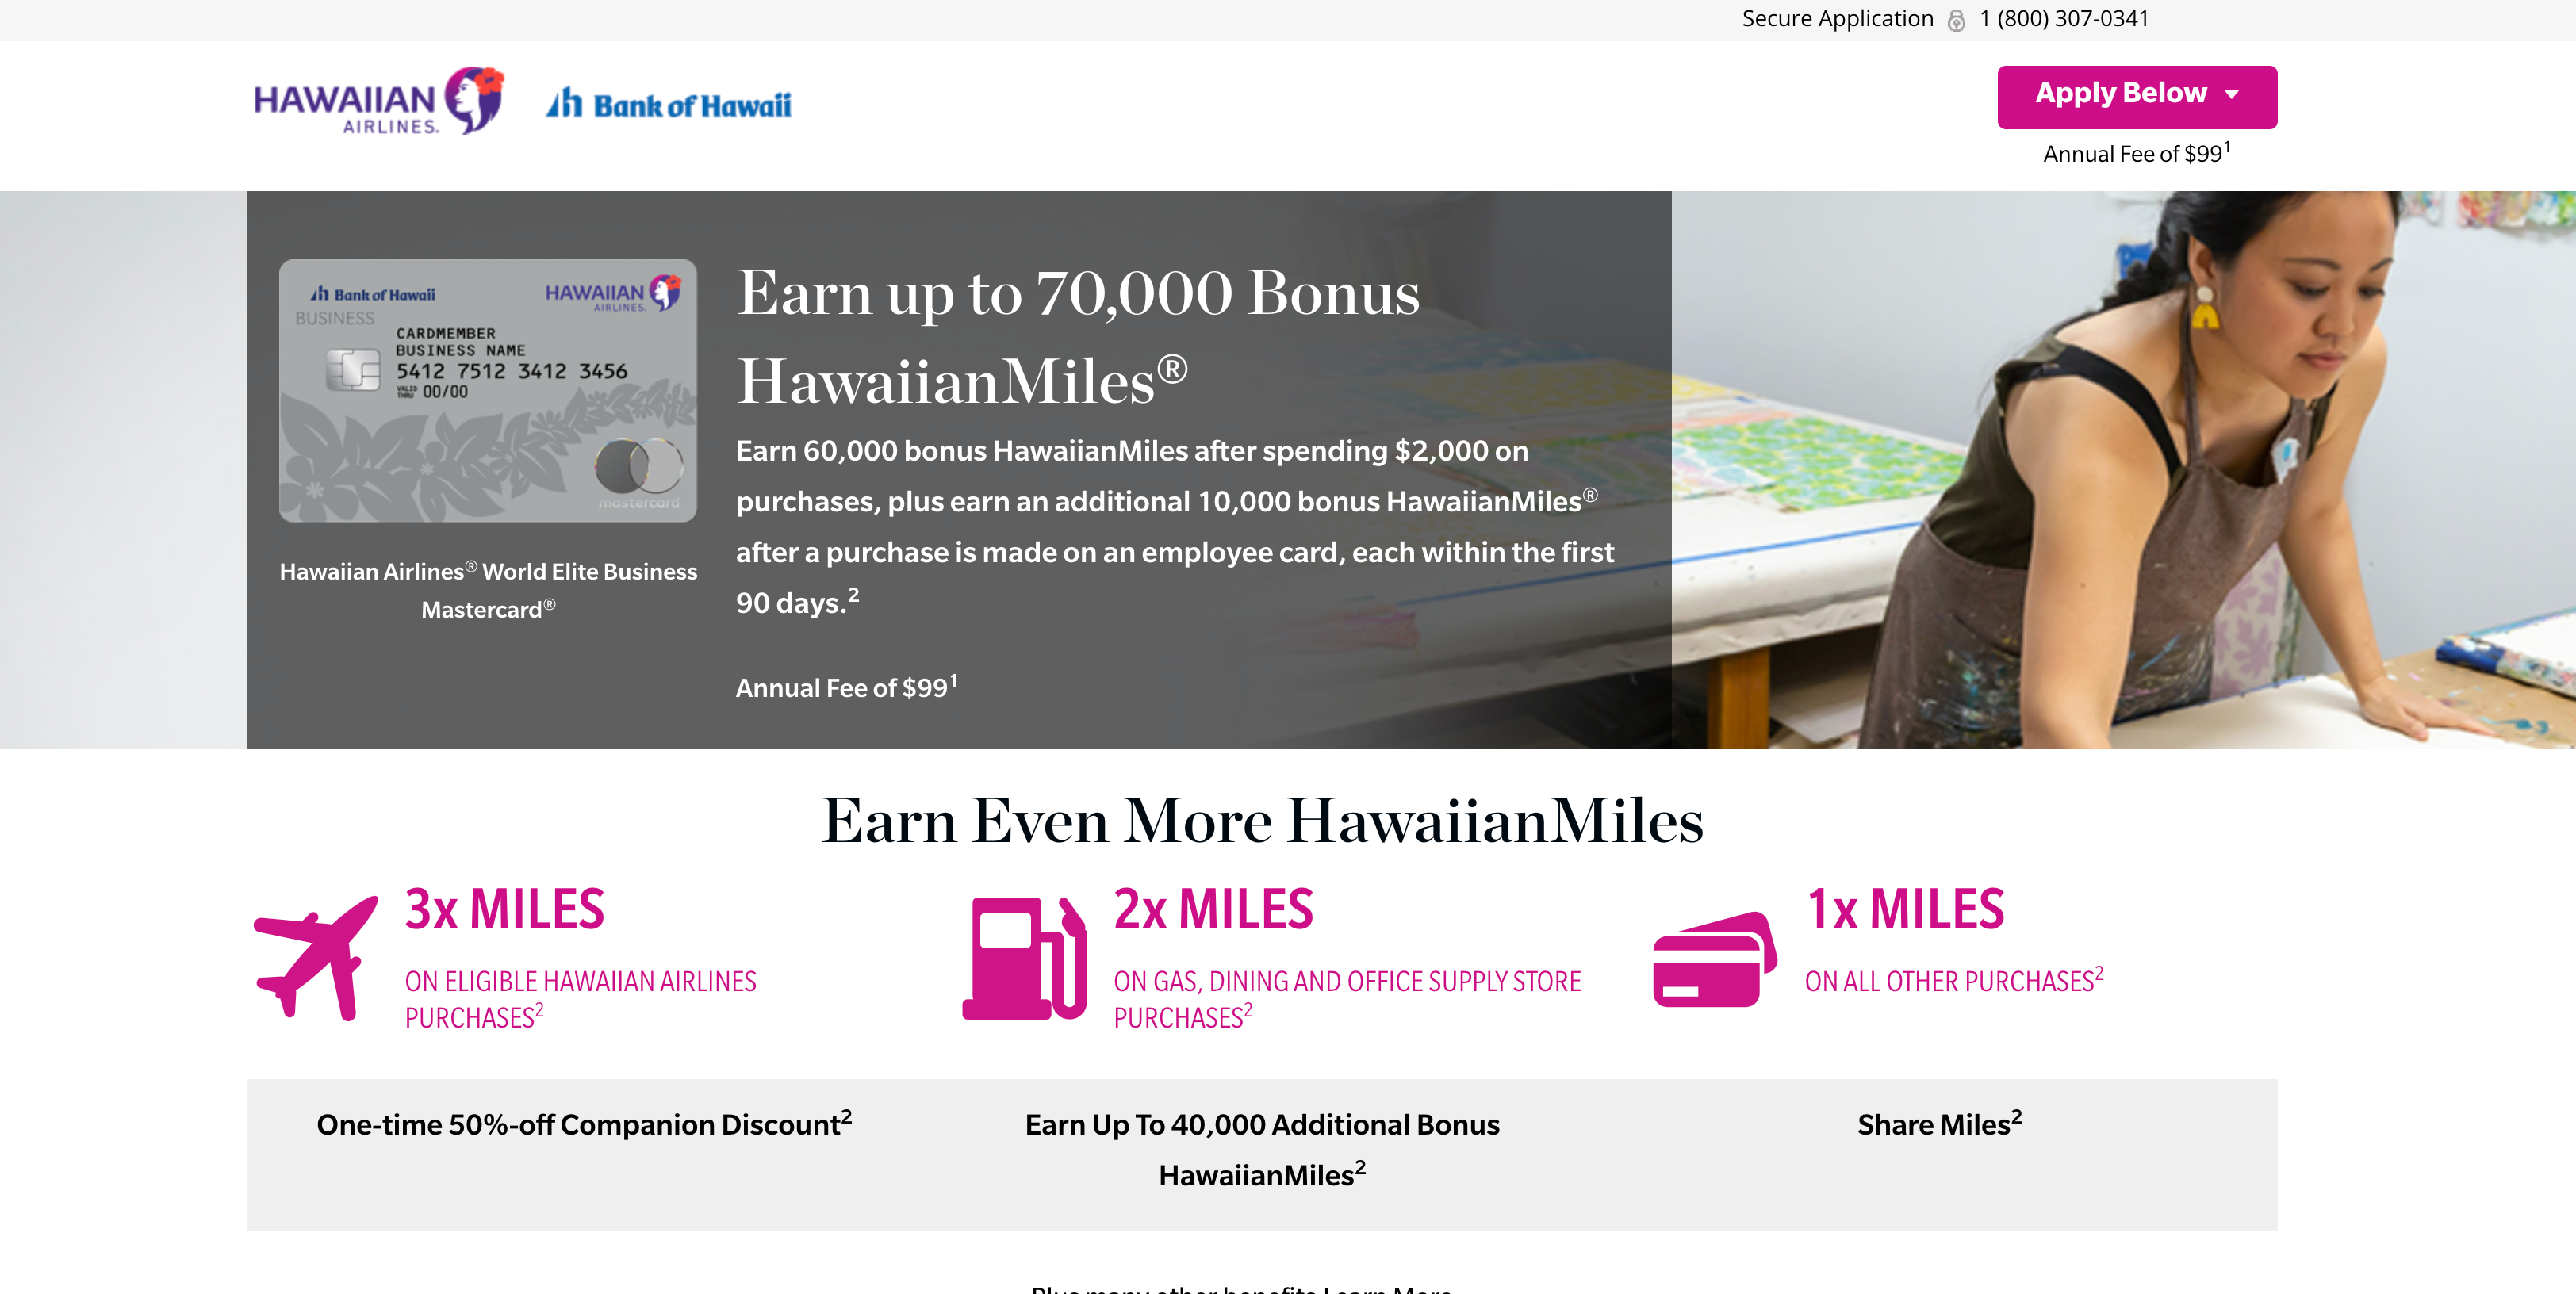 Hawaiian Airlines Business World Elite Mastercard signup offer. 